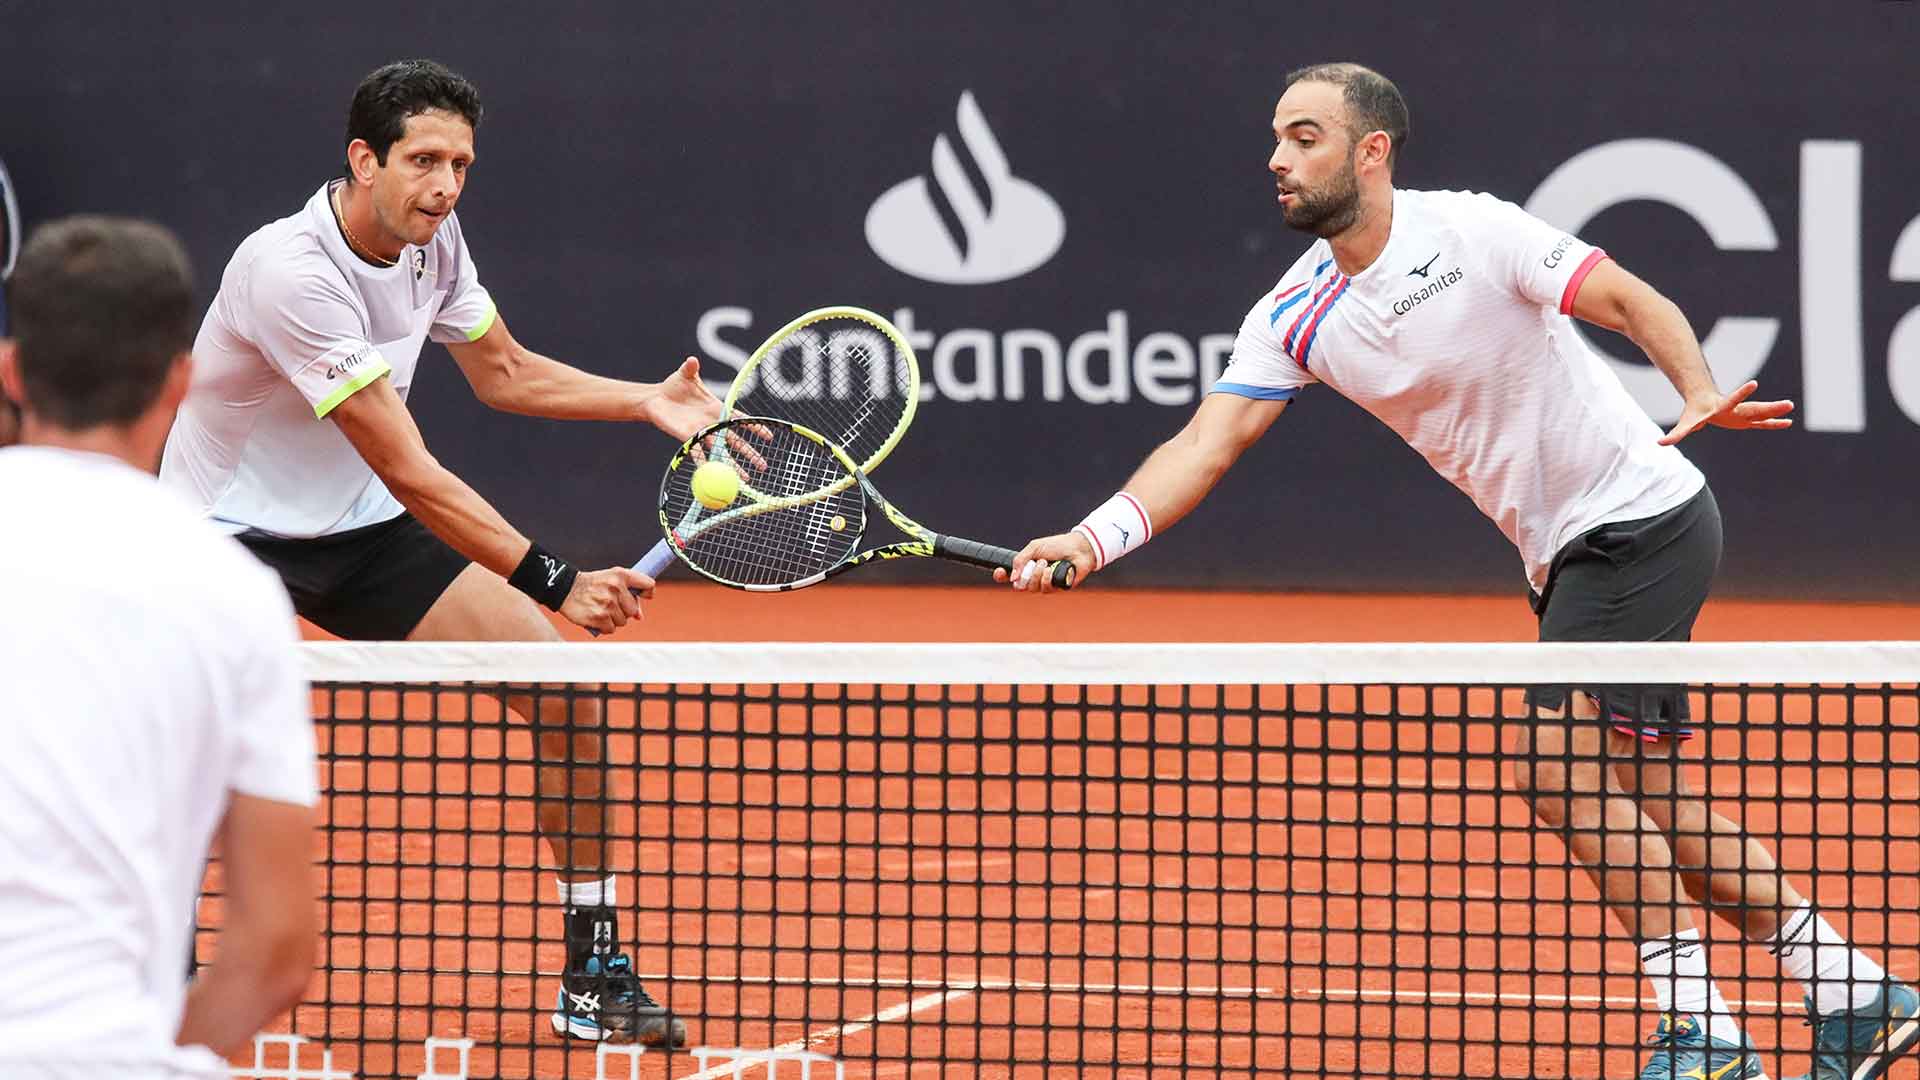 Marcelo Melo and Juan Sebastian Cabal are teaming for the first time this week in Rio de Janeiro.